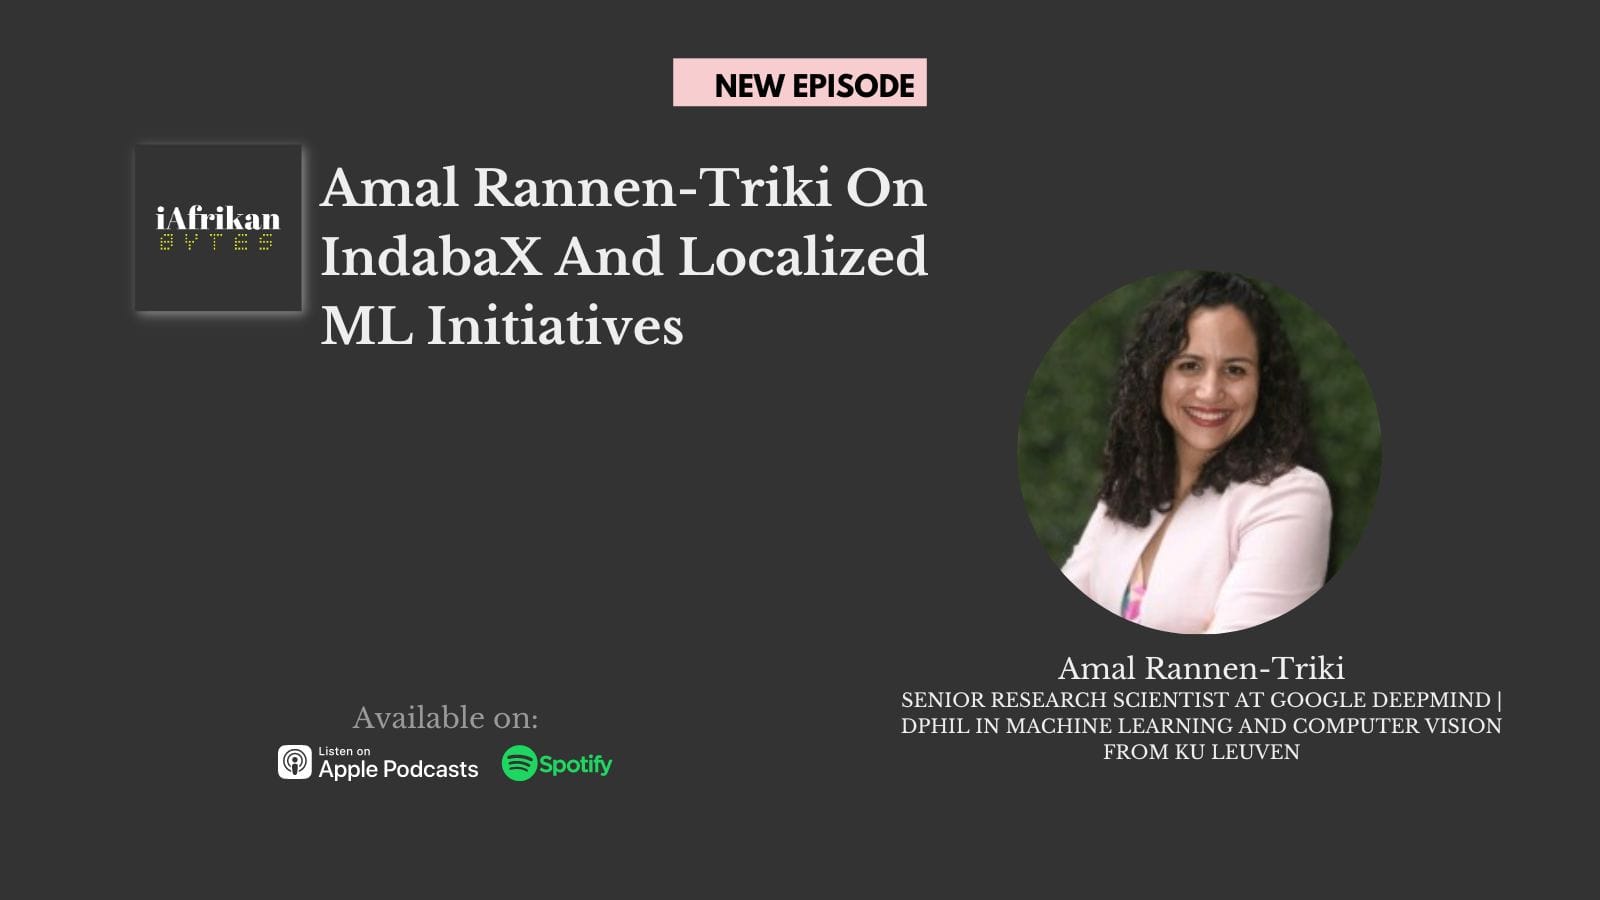 Amal Rannen-Triki on IndabaX and Localized ML Initiatives